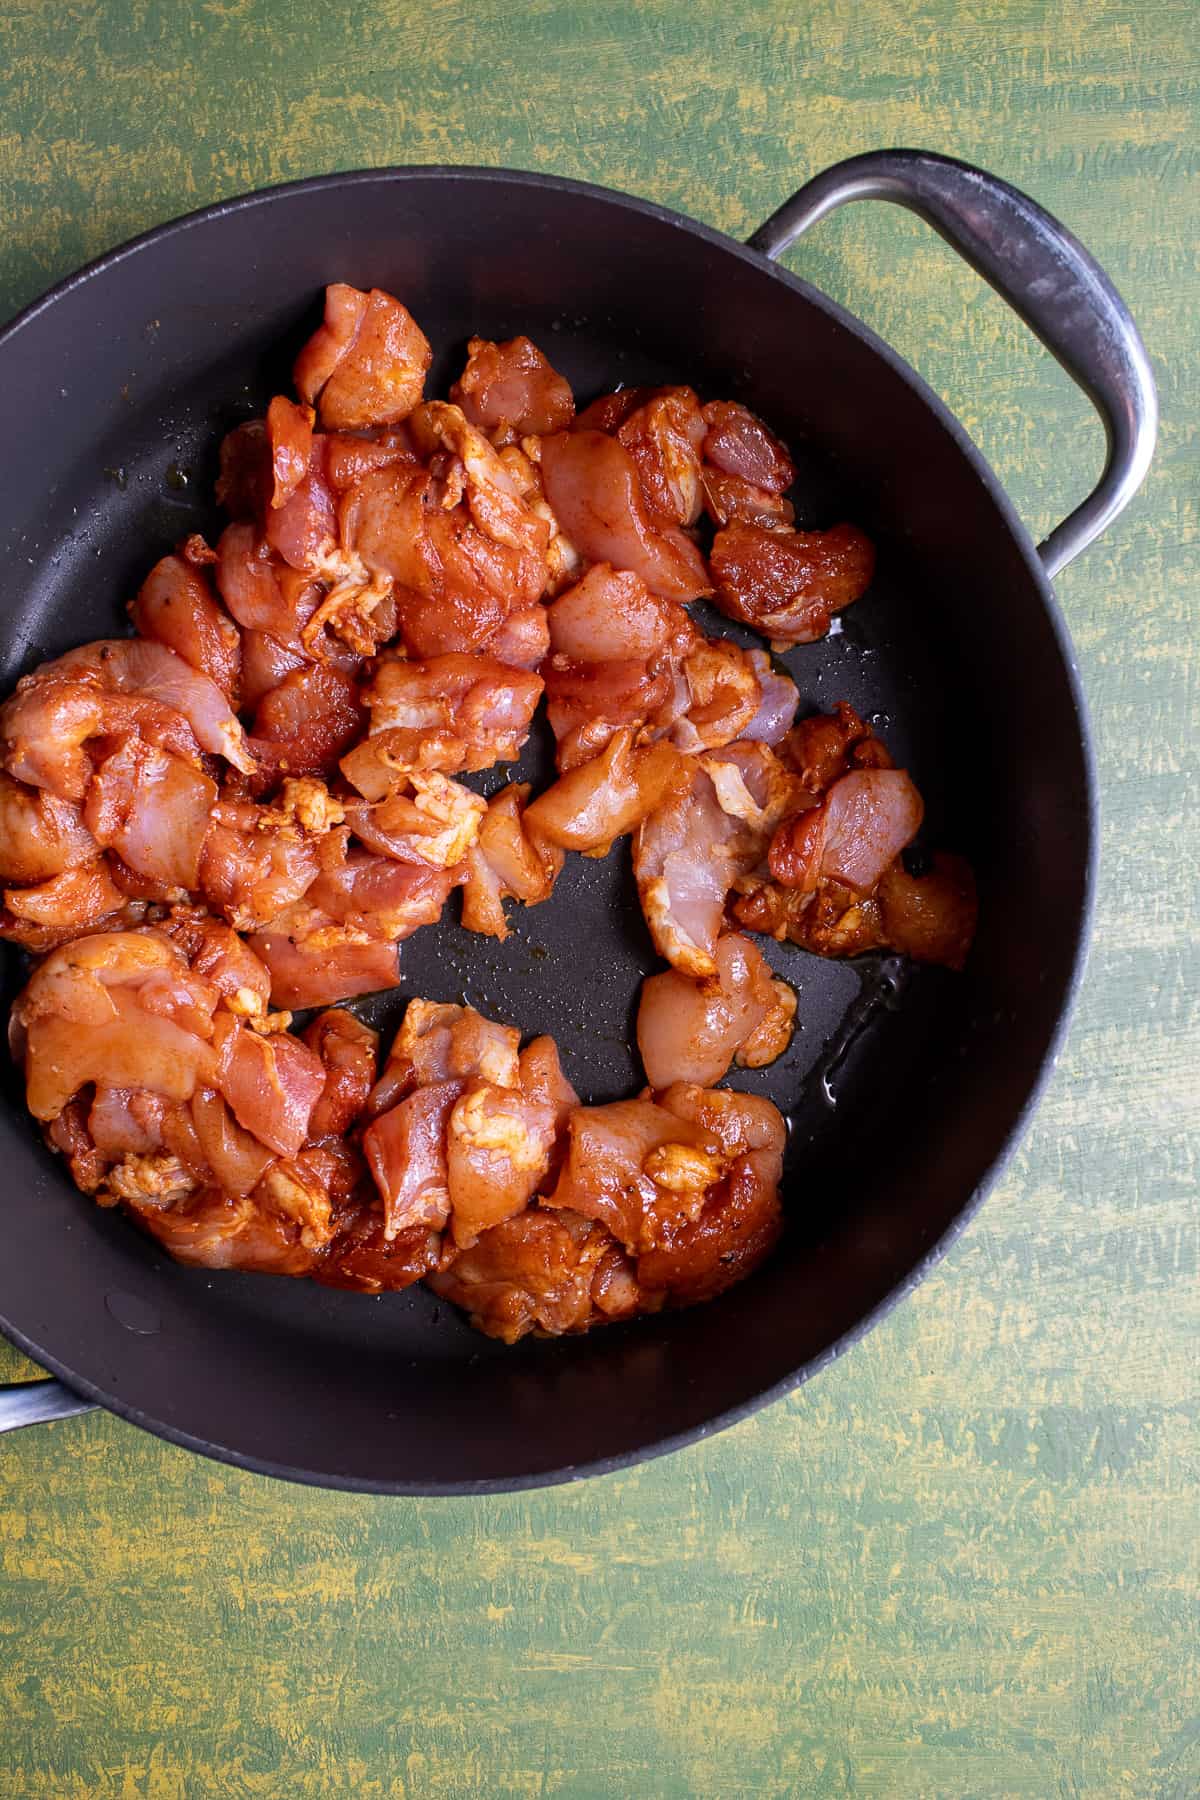 Chunks of seasoned chicken thighs in the bottom of a black skillet.